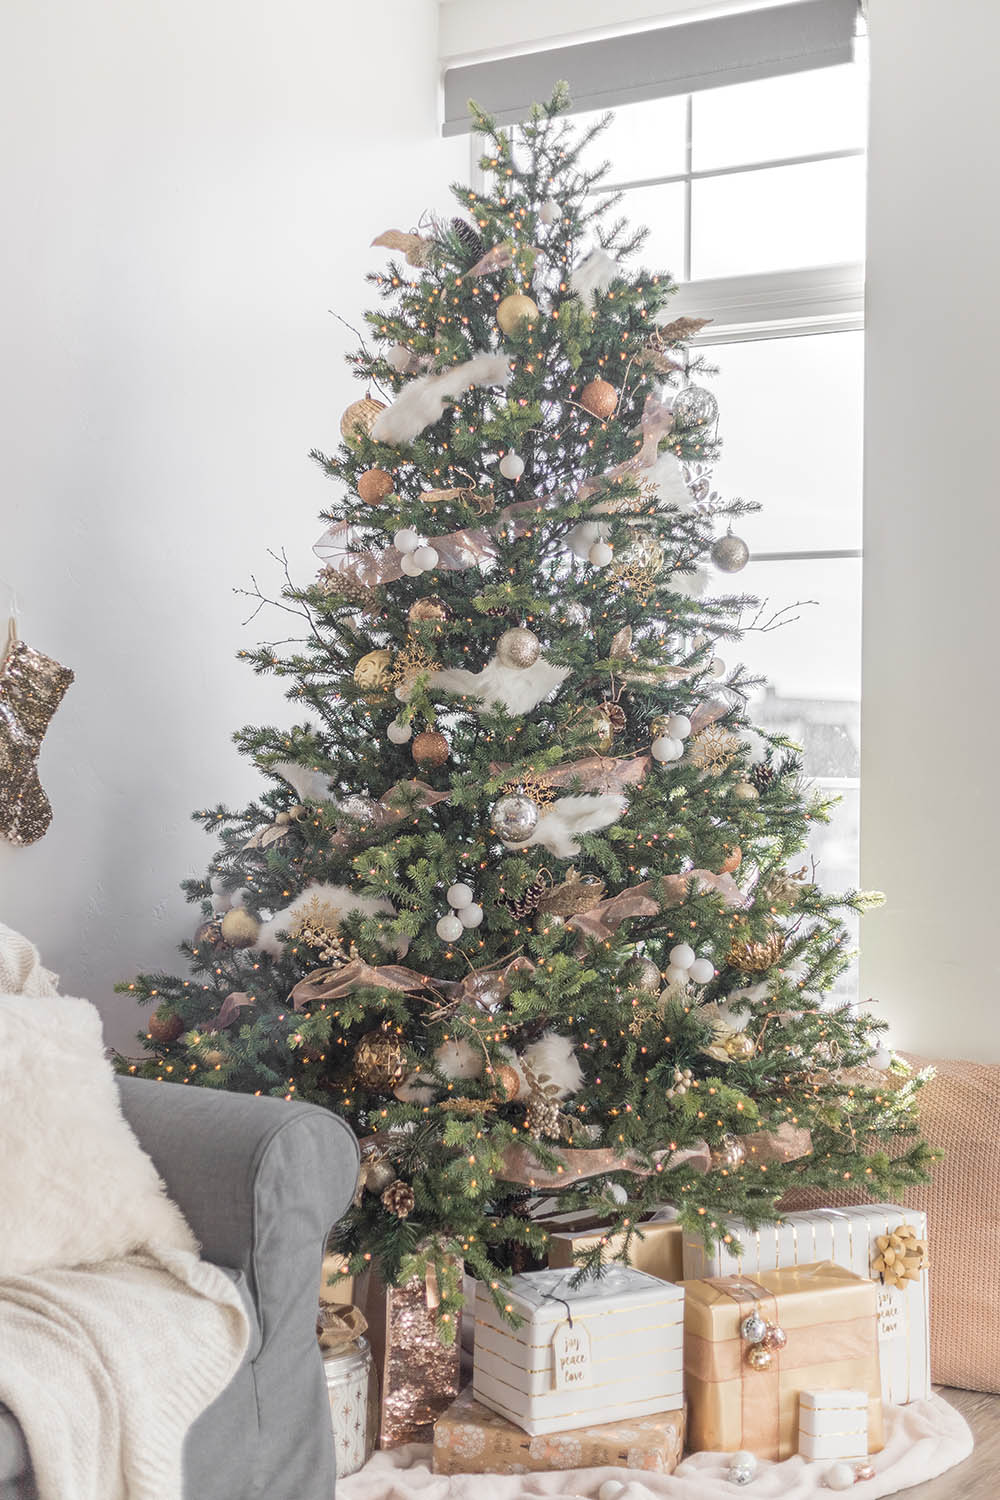 A Christmas tree decorated in white, gold, silver, and copper.